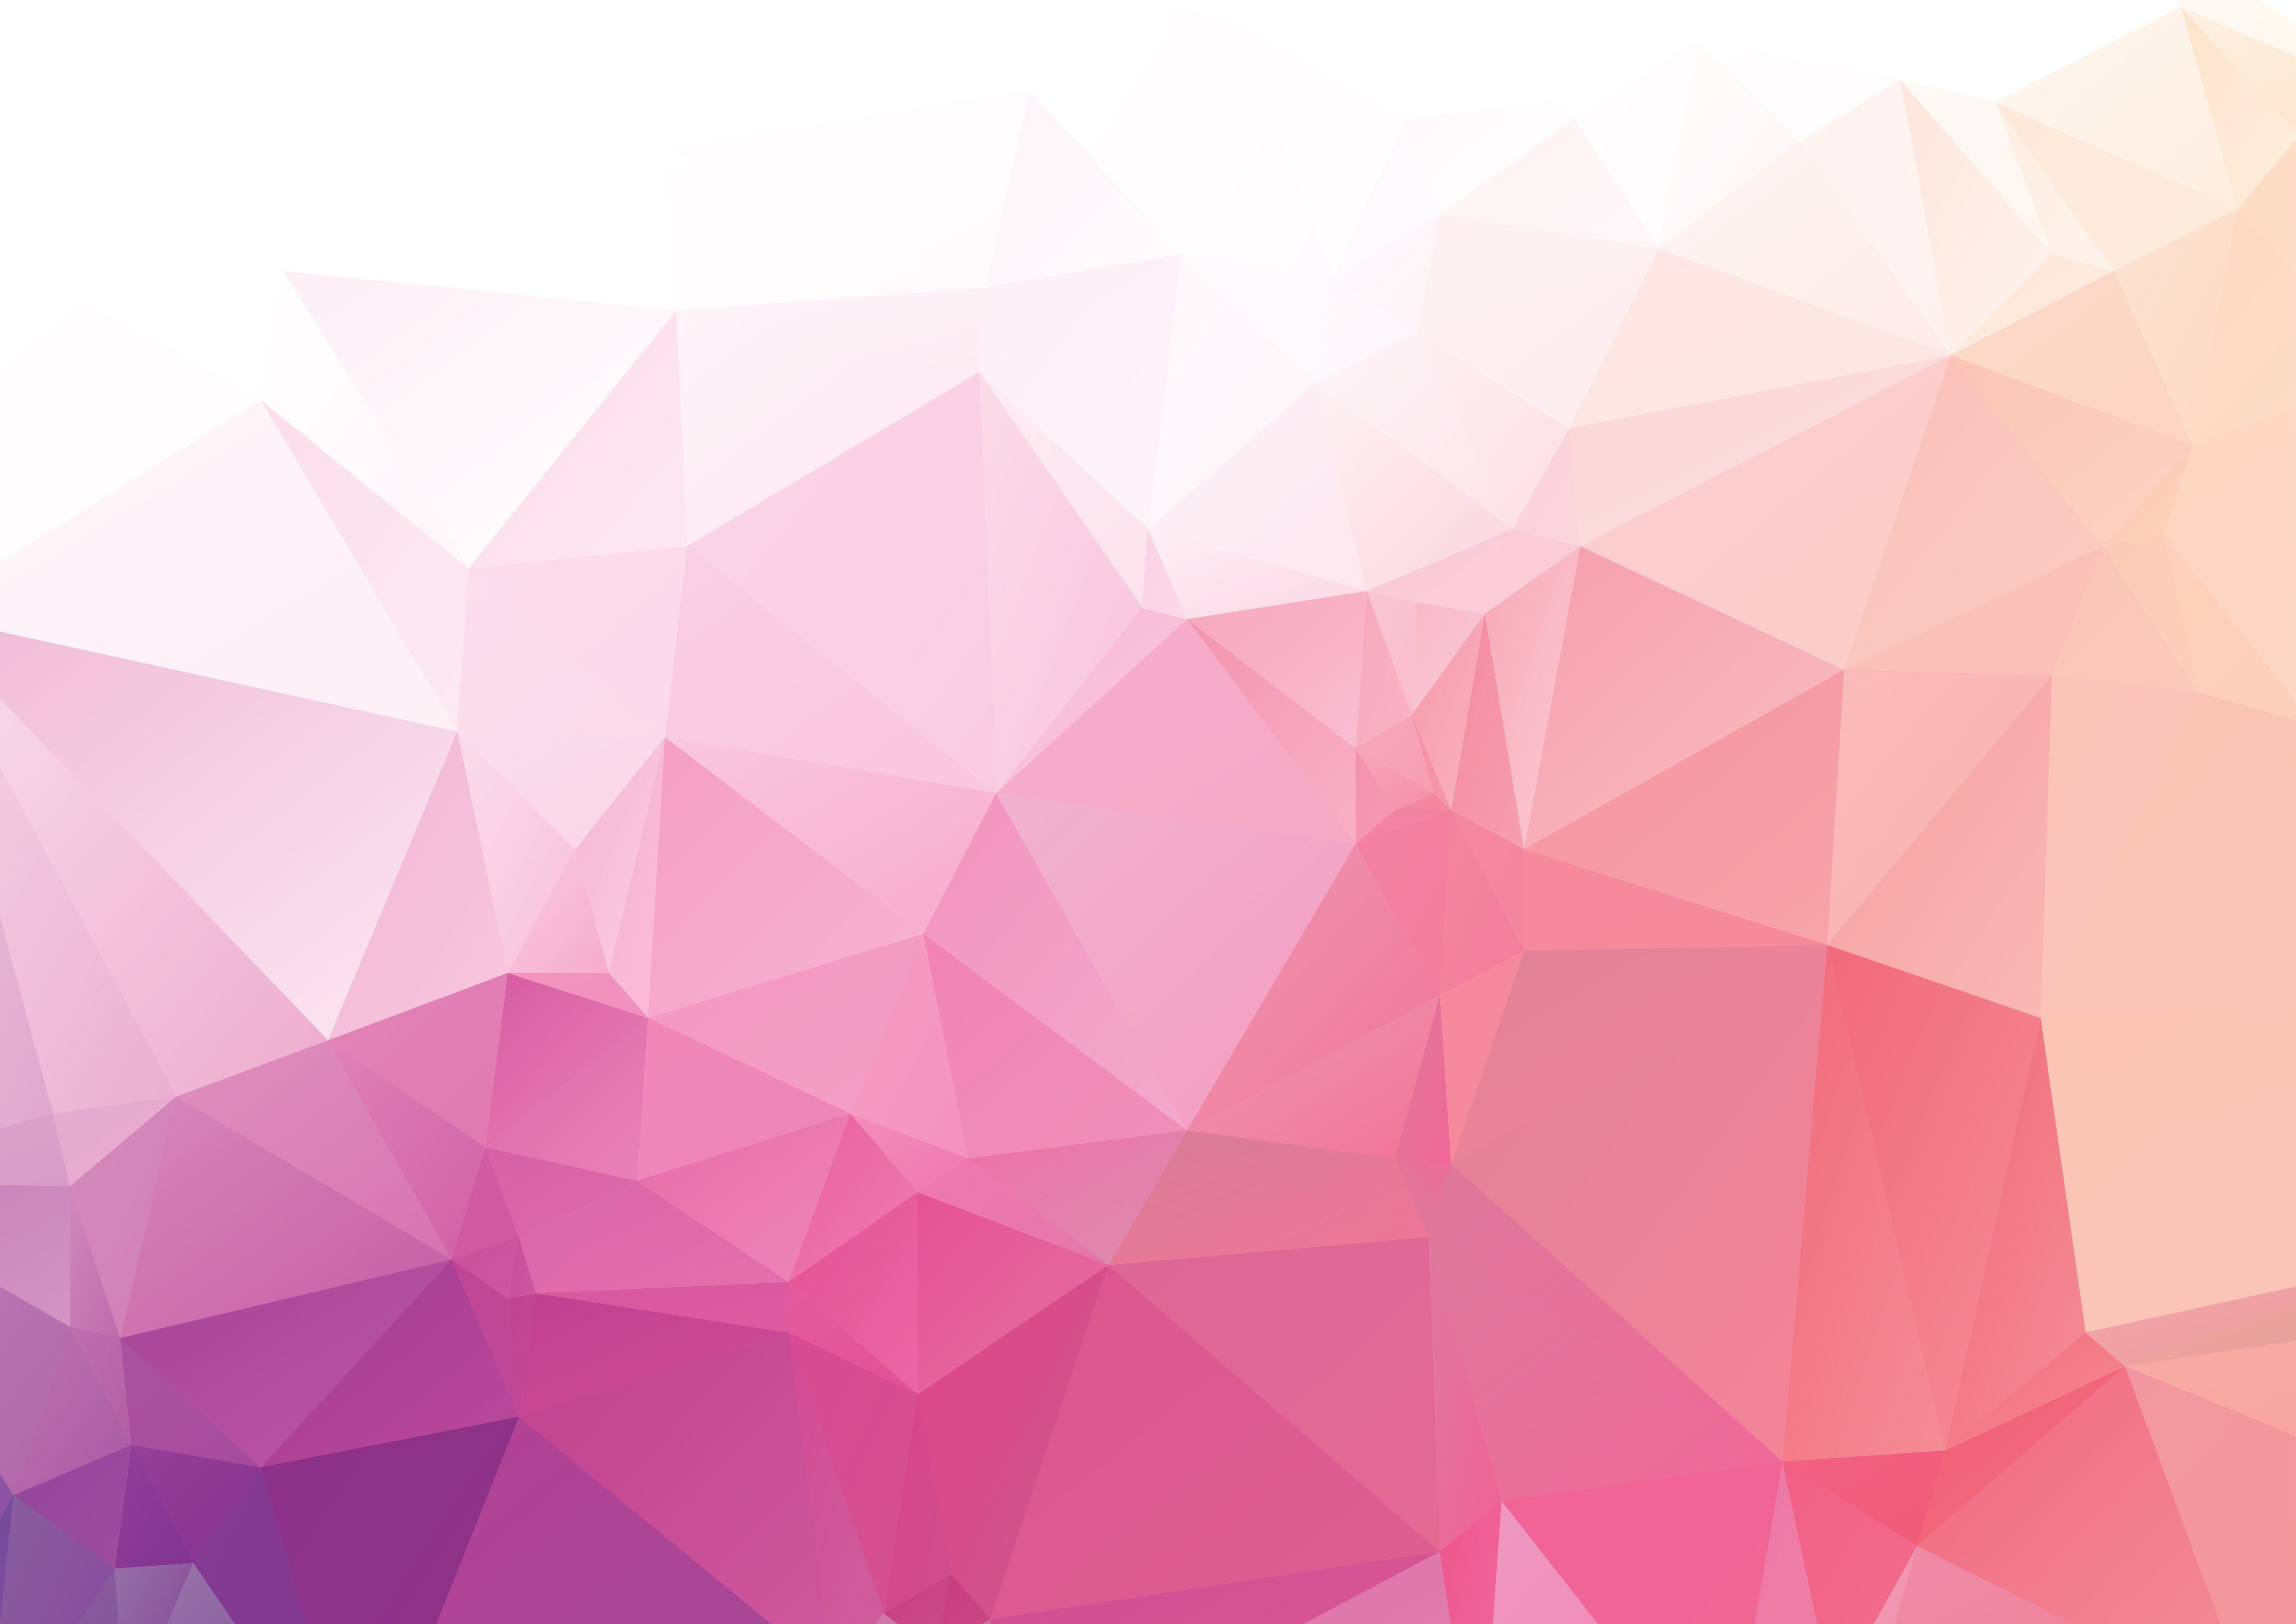  Pink  abstract geometric rumpled triangular low poly style 